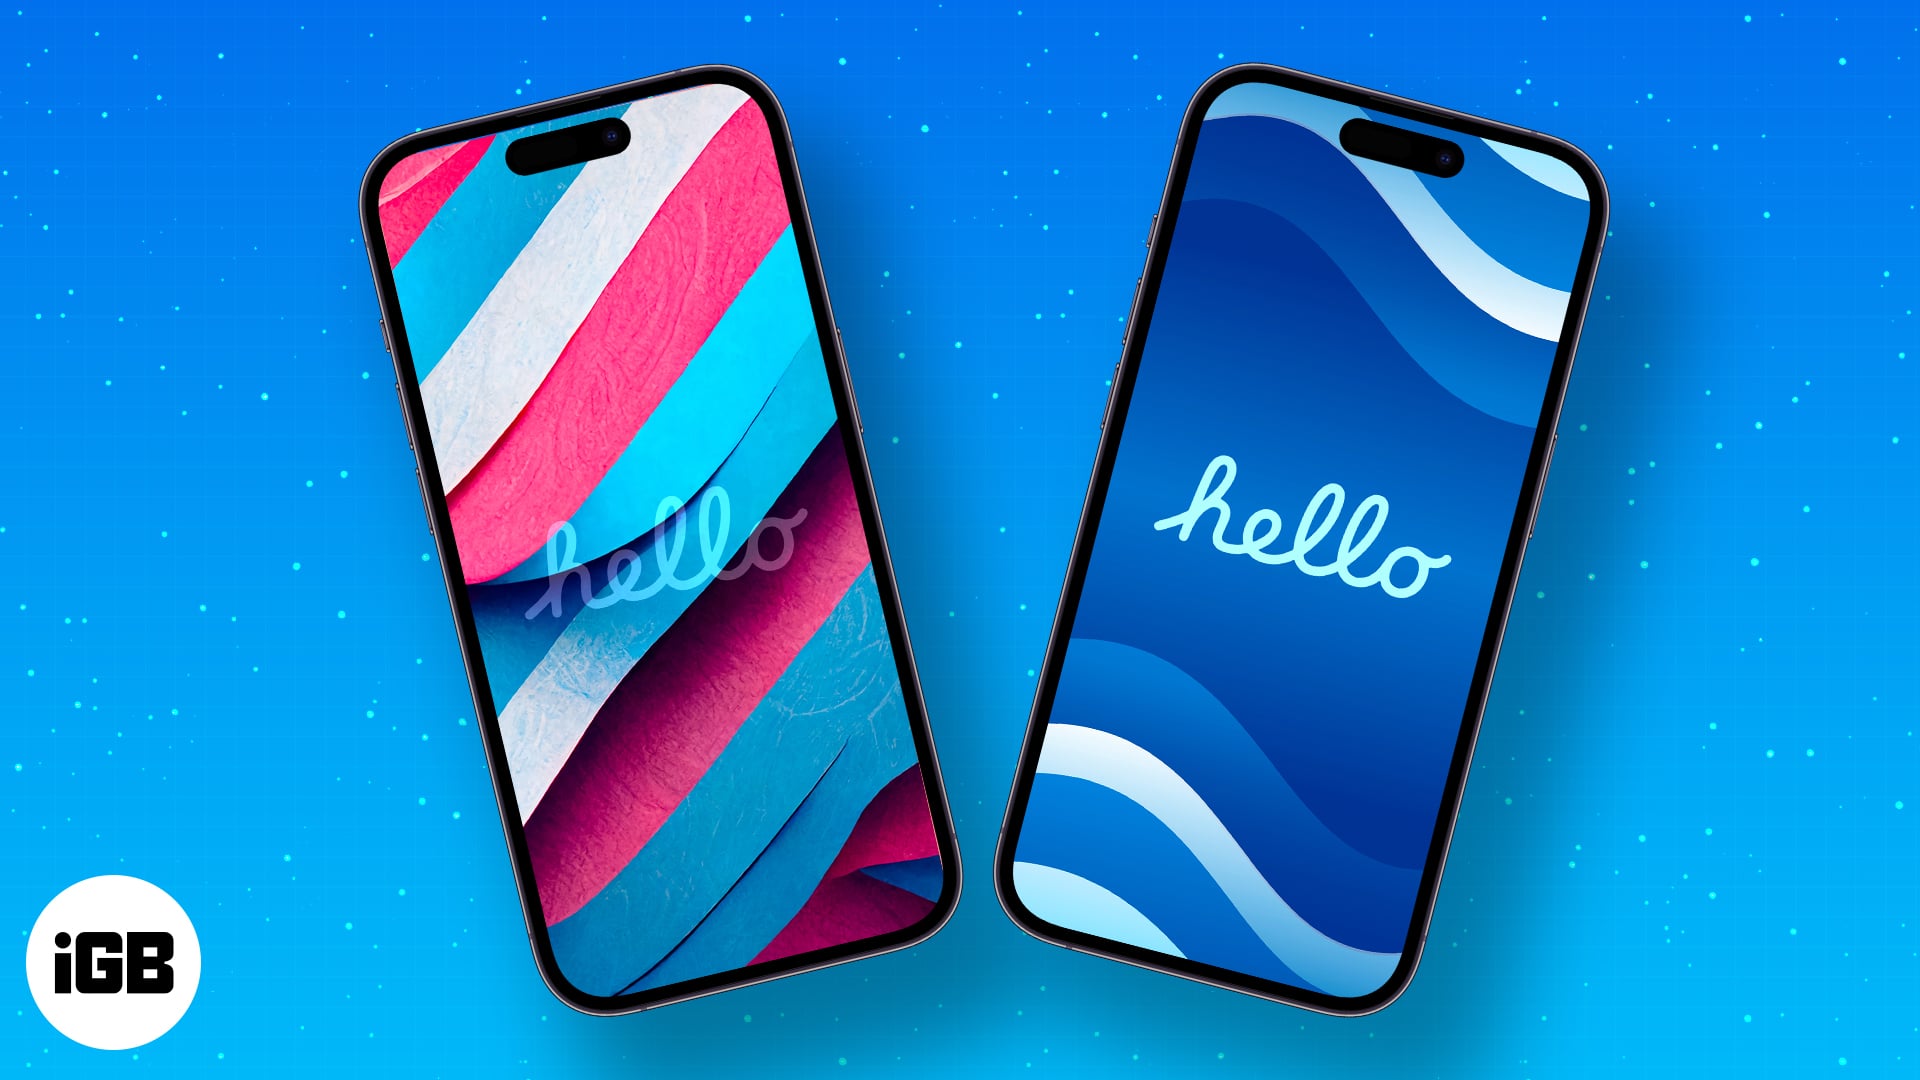 15 Cool Among Us wallpapers for iPhone in 2023 (Free) - iGeeksBlog